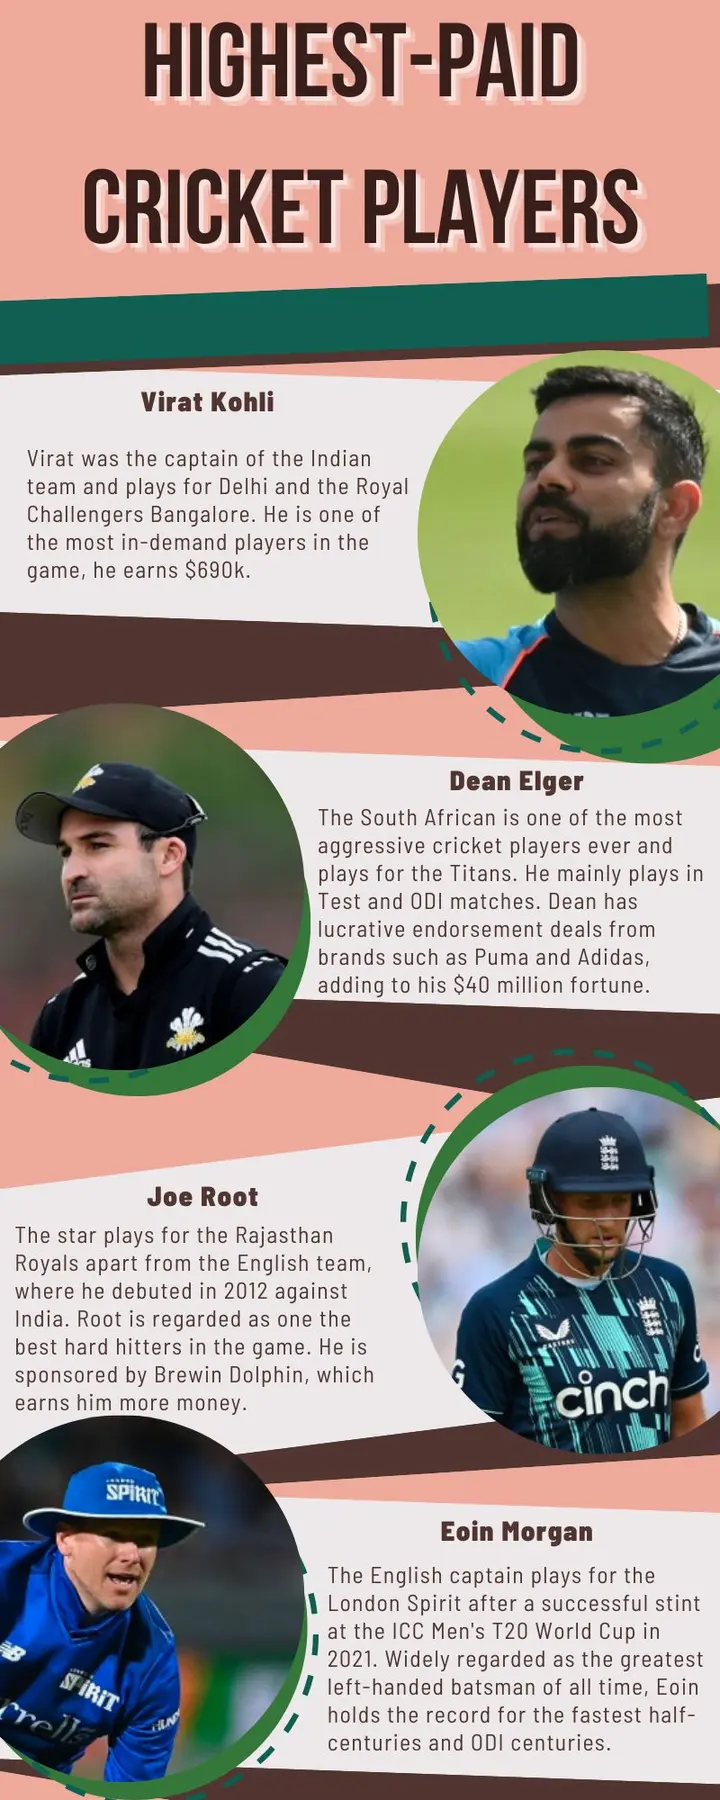 Highest-paid cricket players